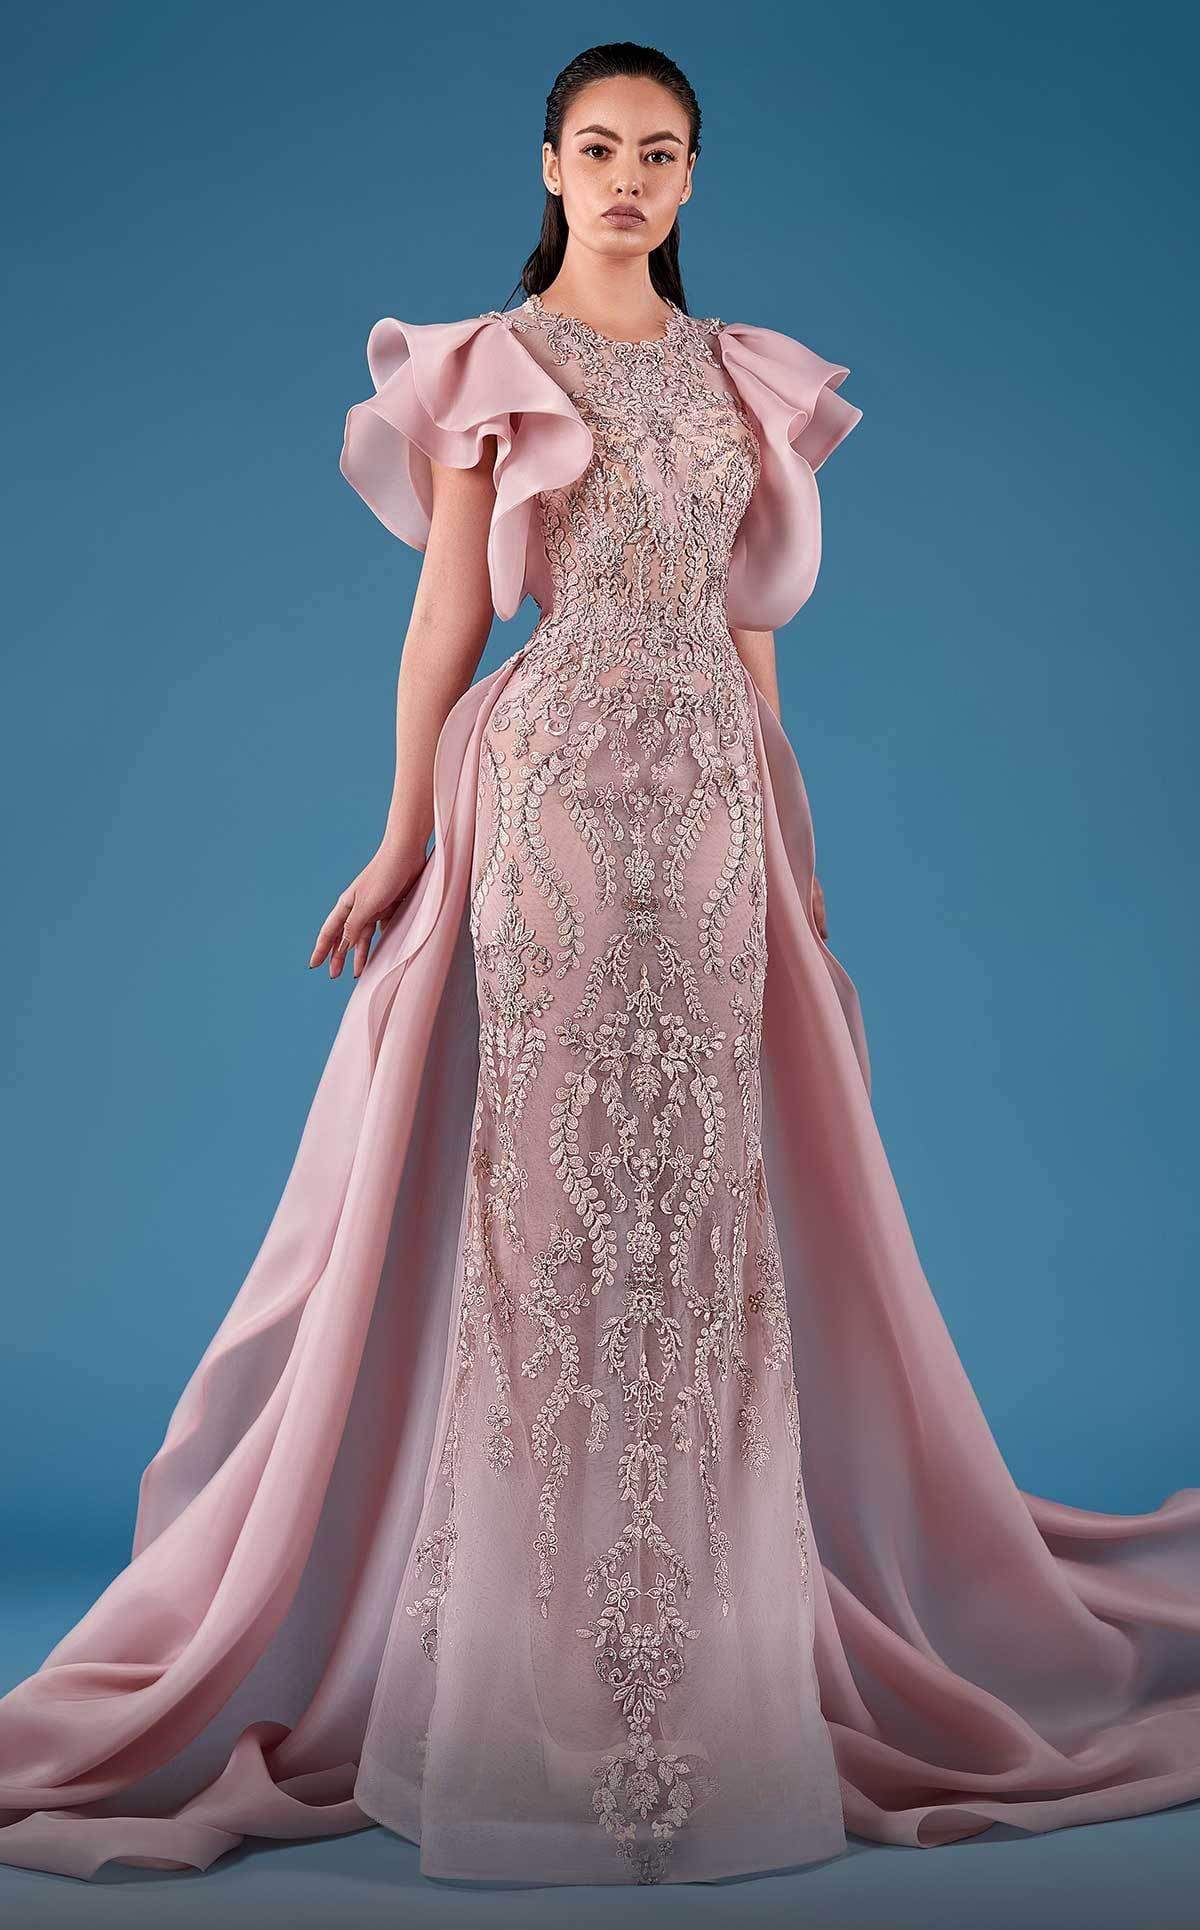 MNM COUTURE - K3754 Embroidered Jewel Neck Sheath Dress In Pink